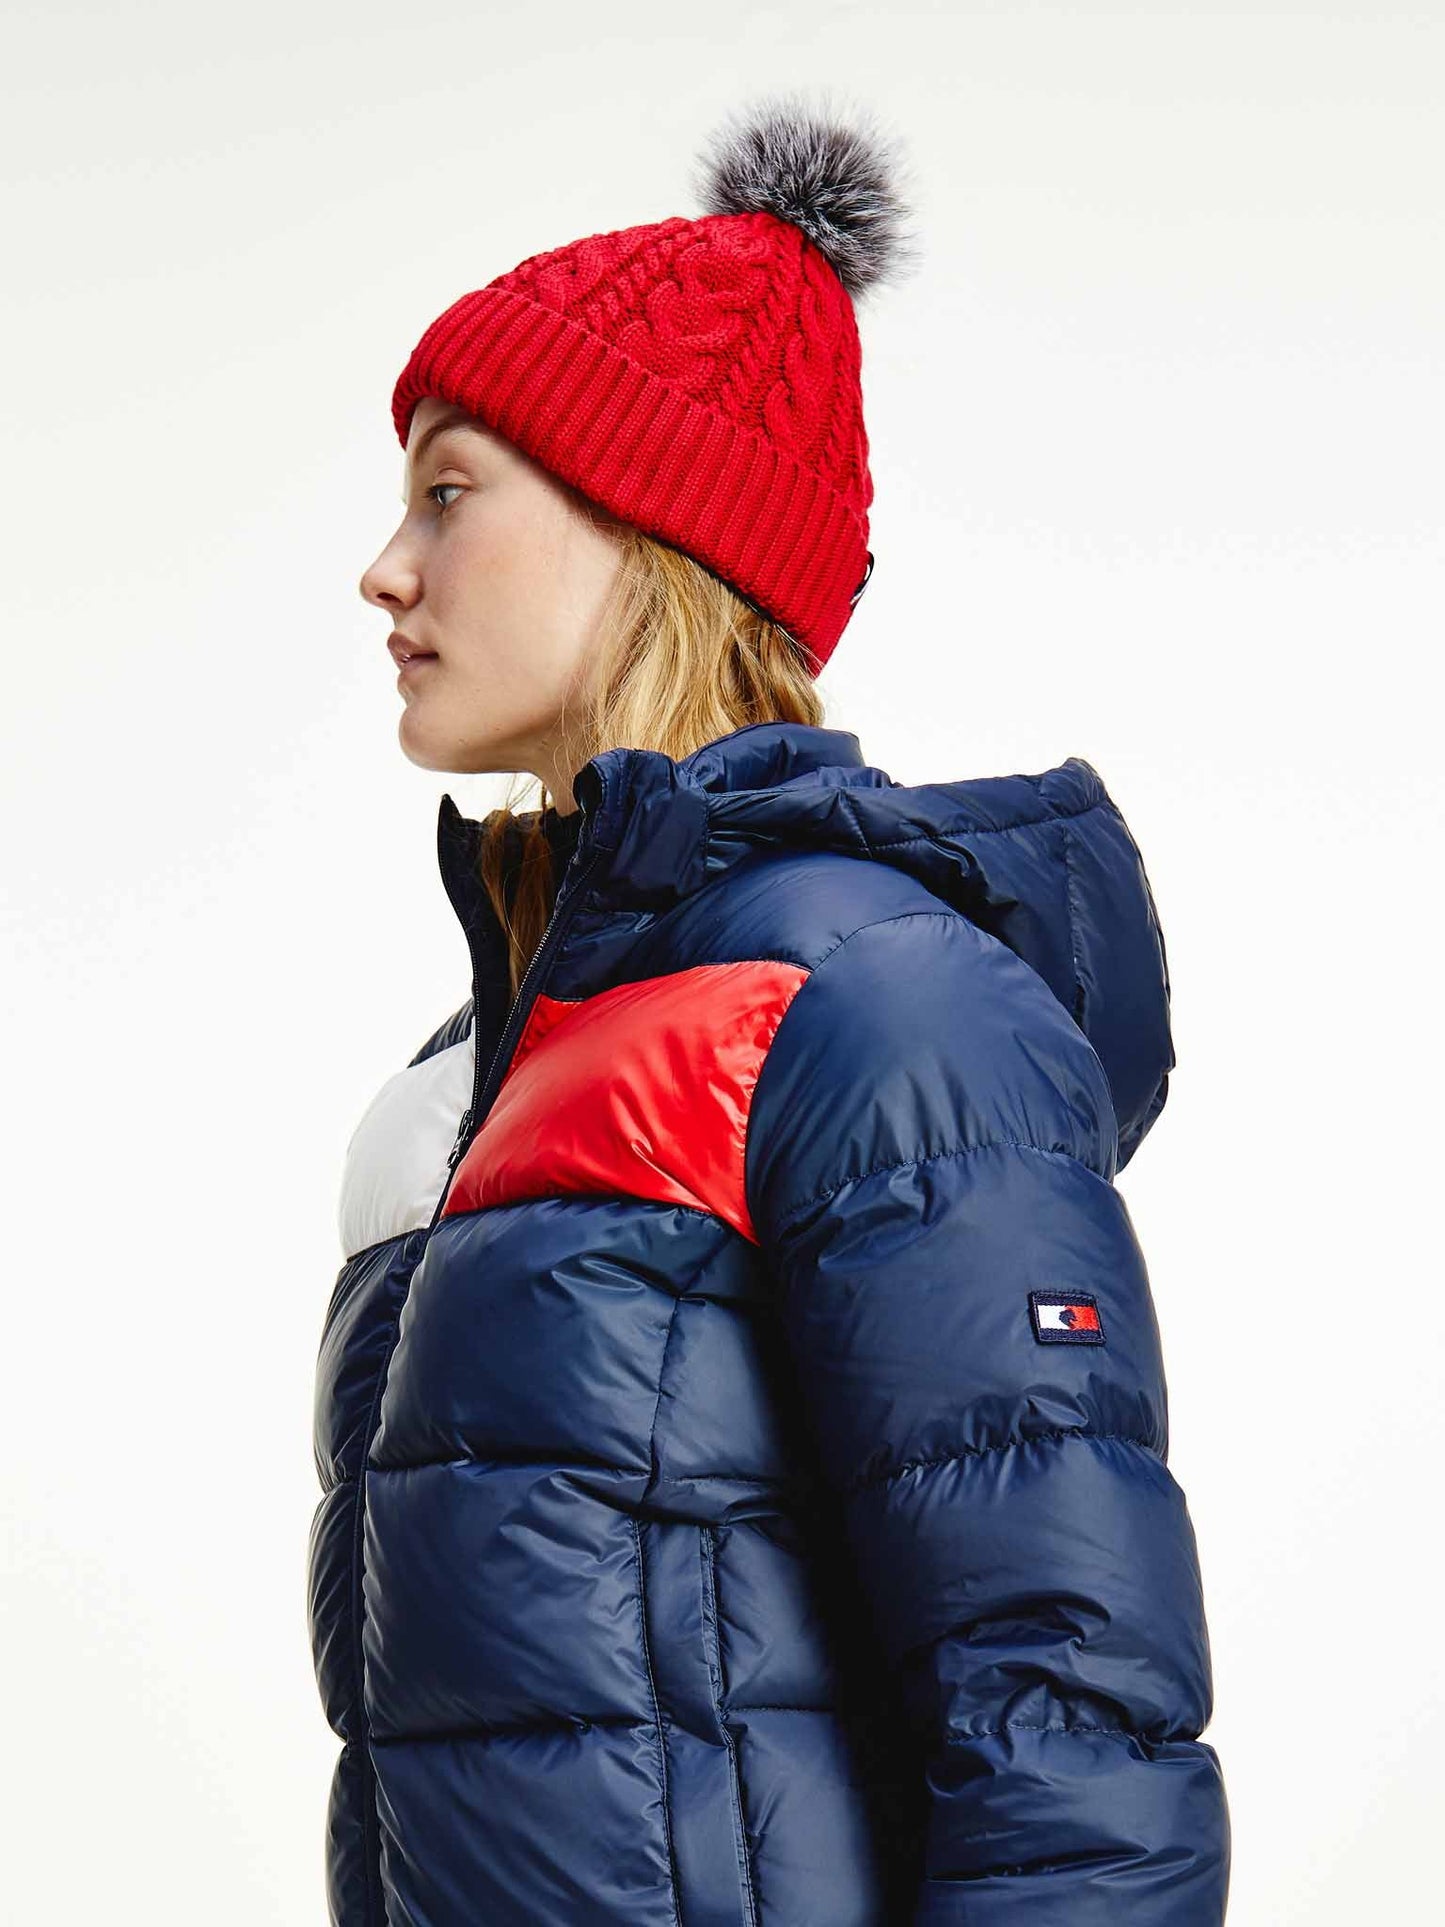 Bonnet Primary Red - Tommy Hilfiger Equestrian